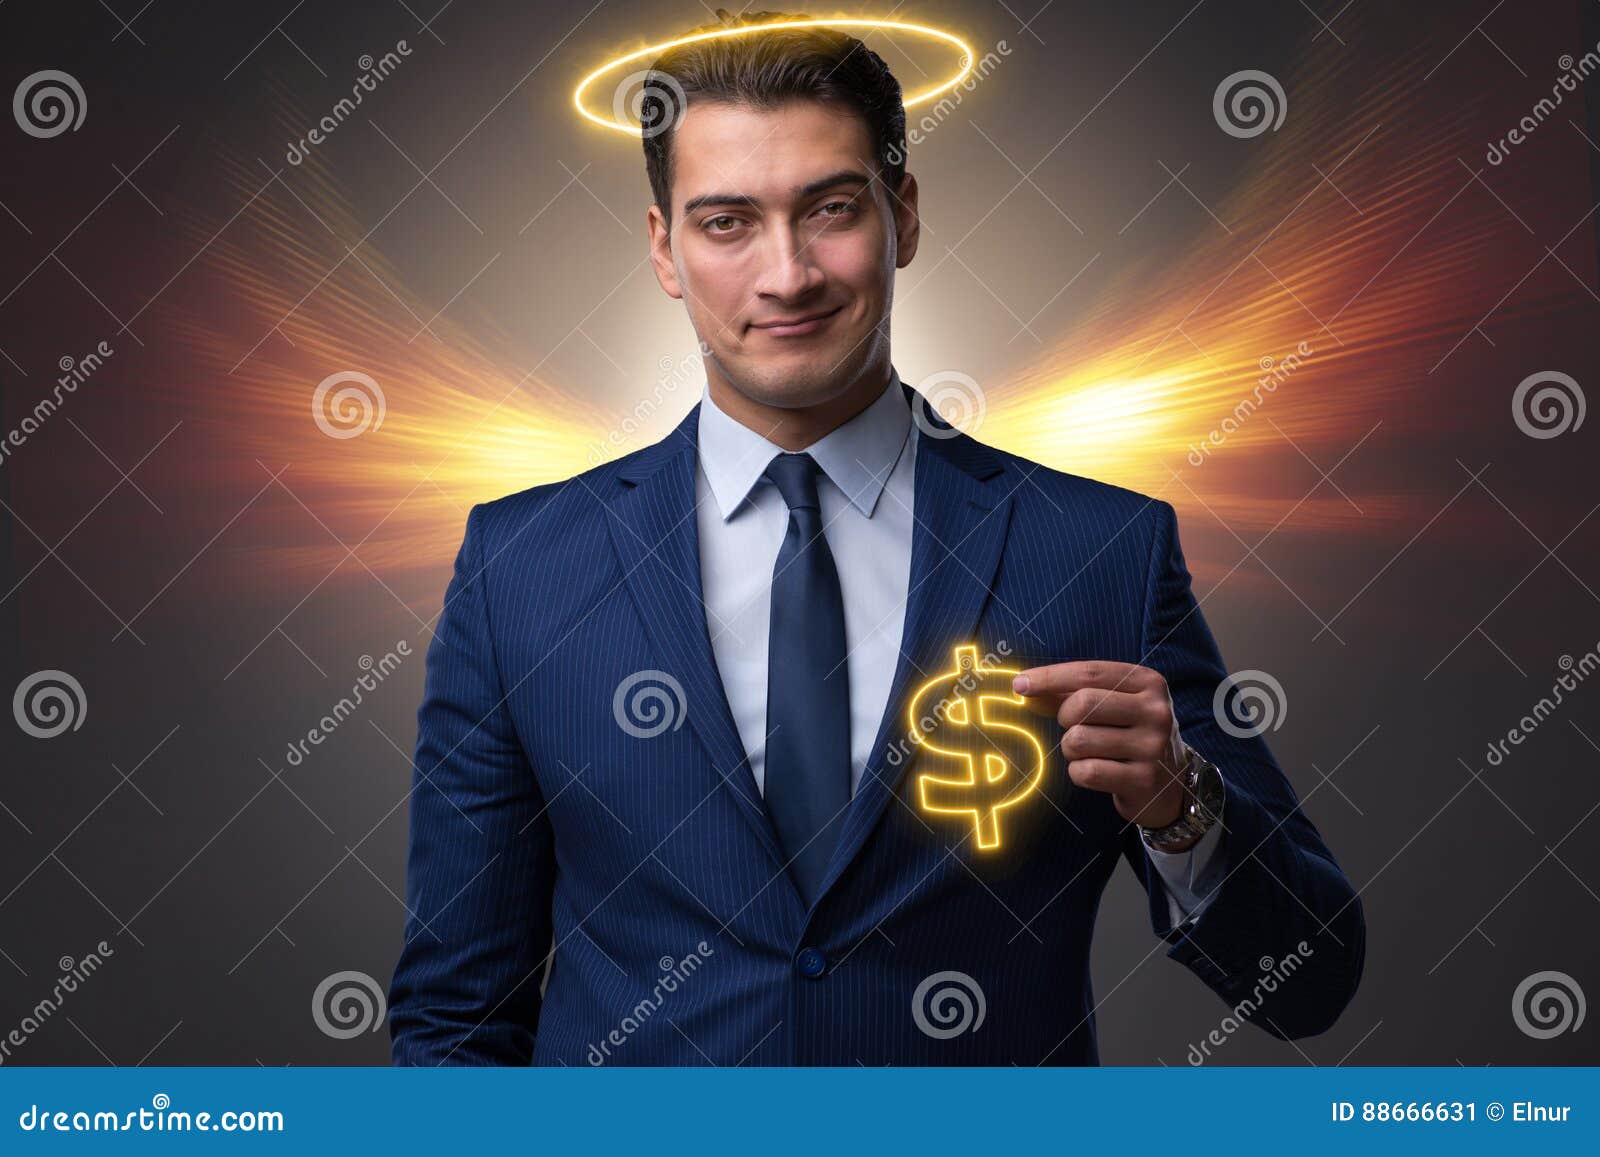 the angel investor concept with businessman with wings